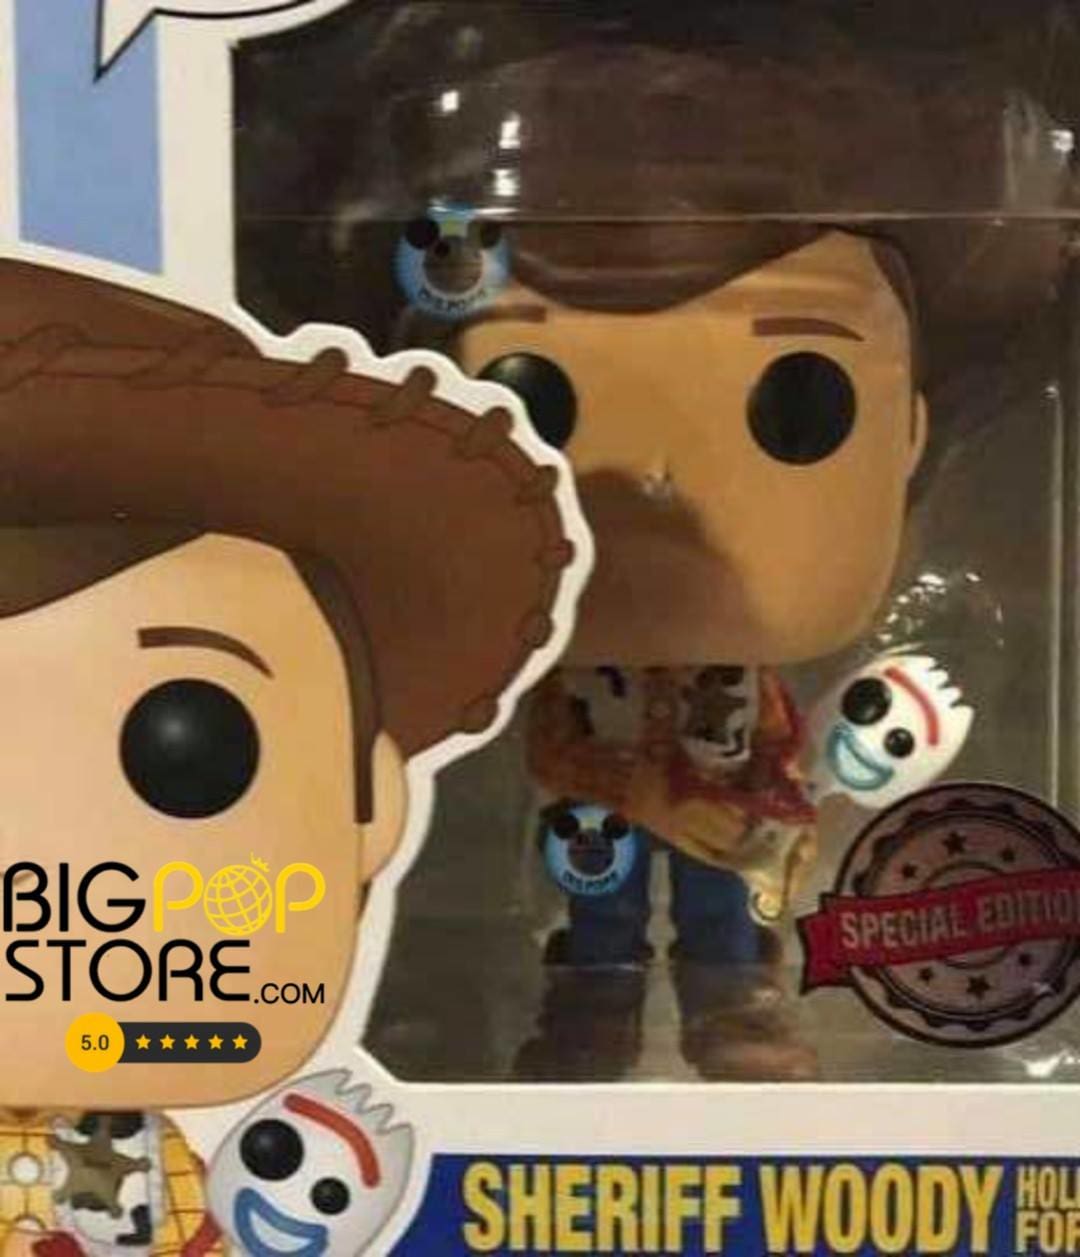 woody with forky funko pop